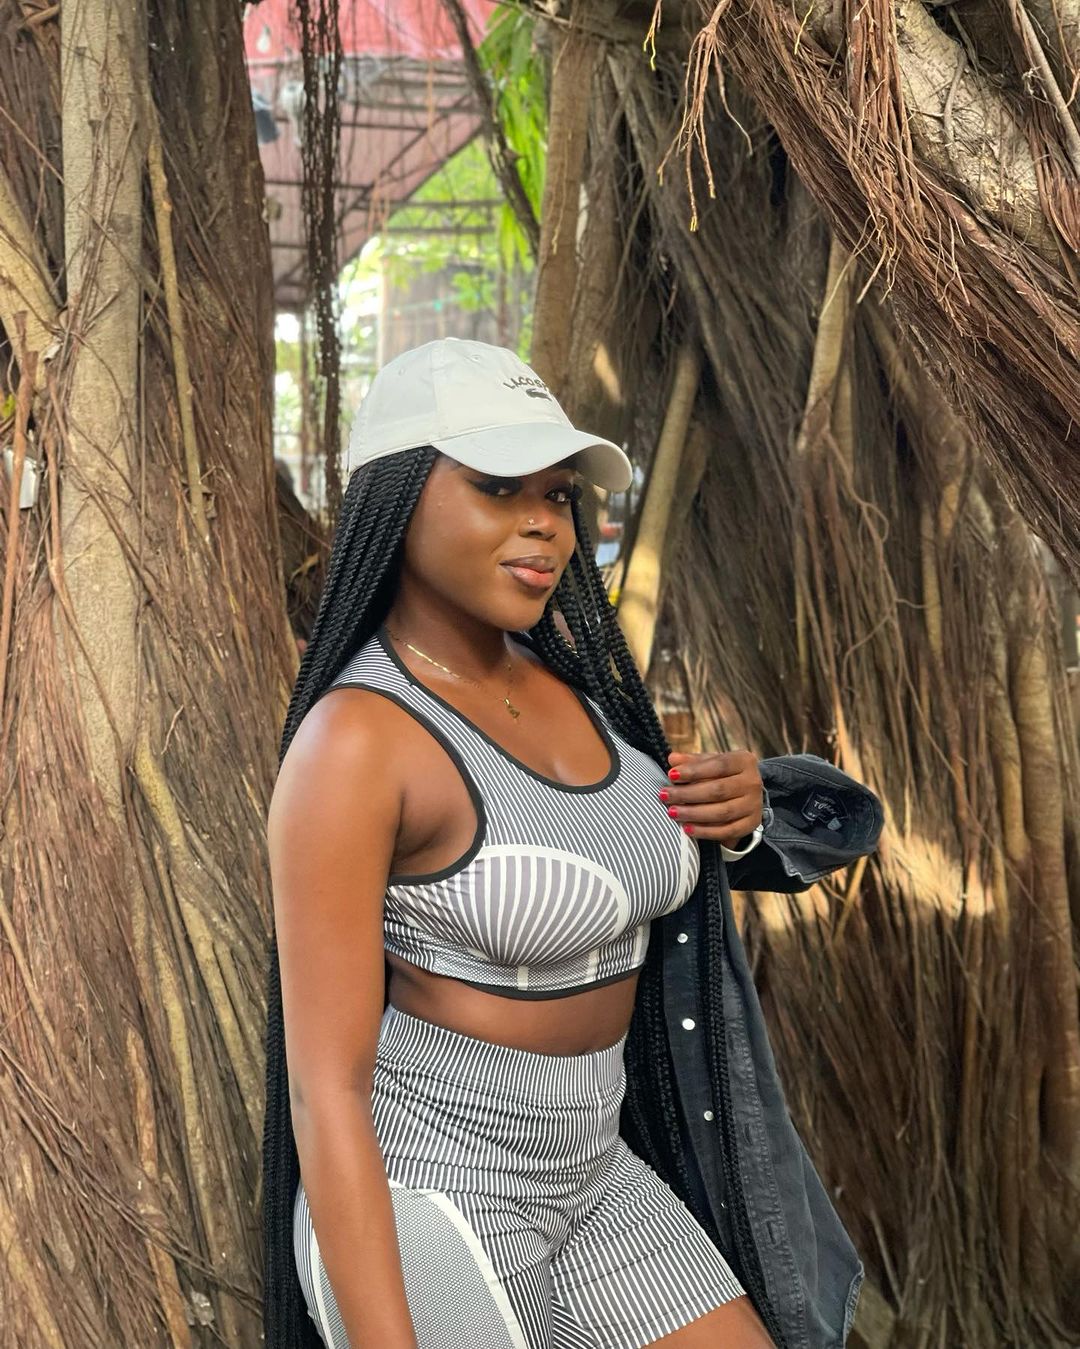 I should be paid every day to be beautiful – Statement by Influencer Saidaboj